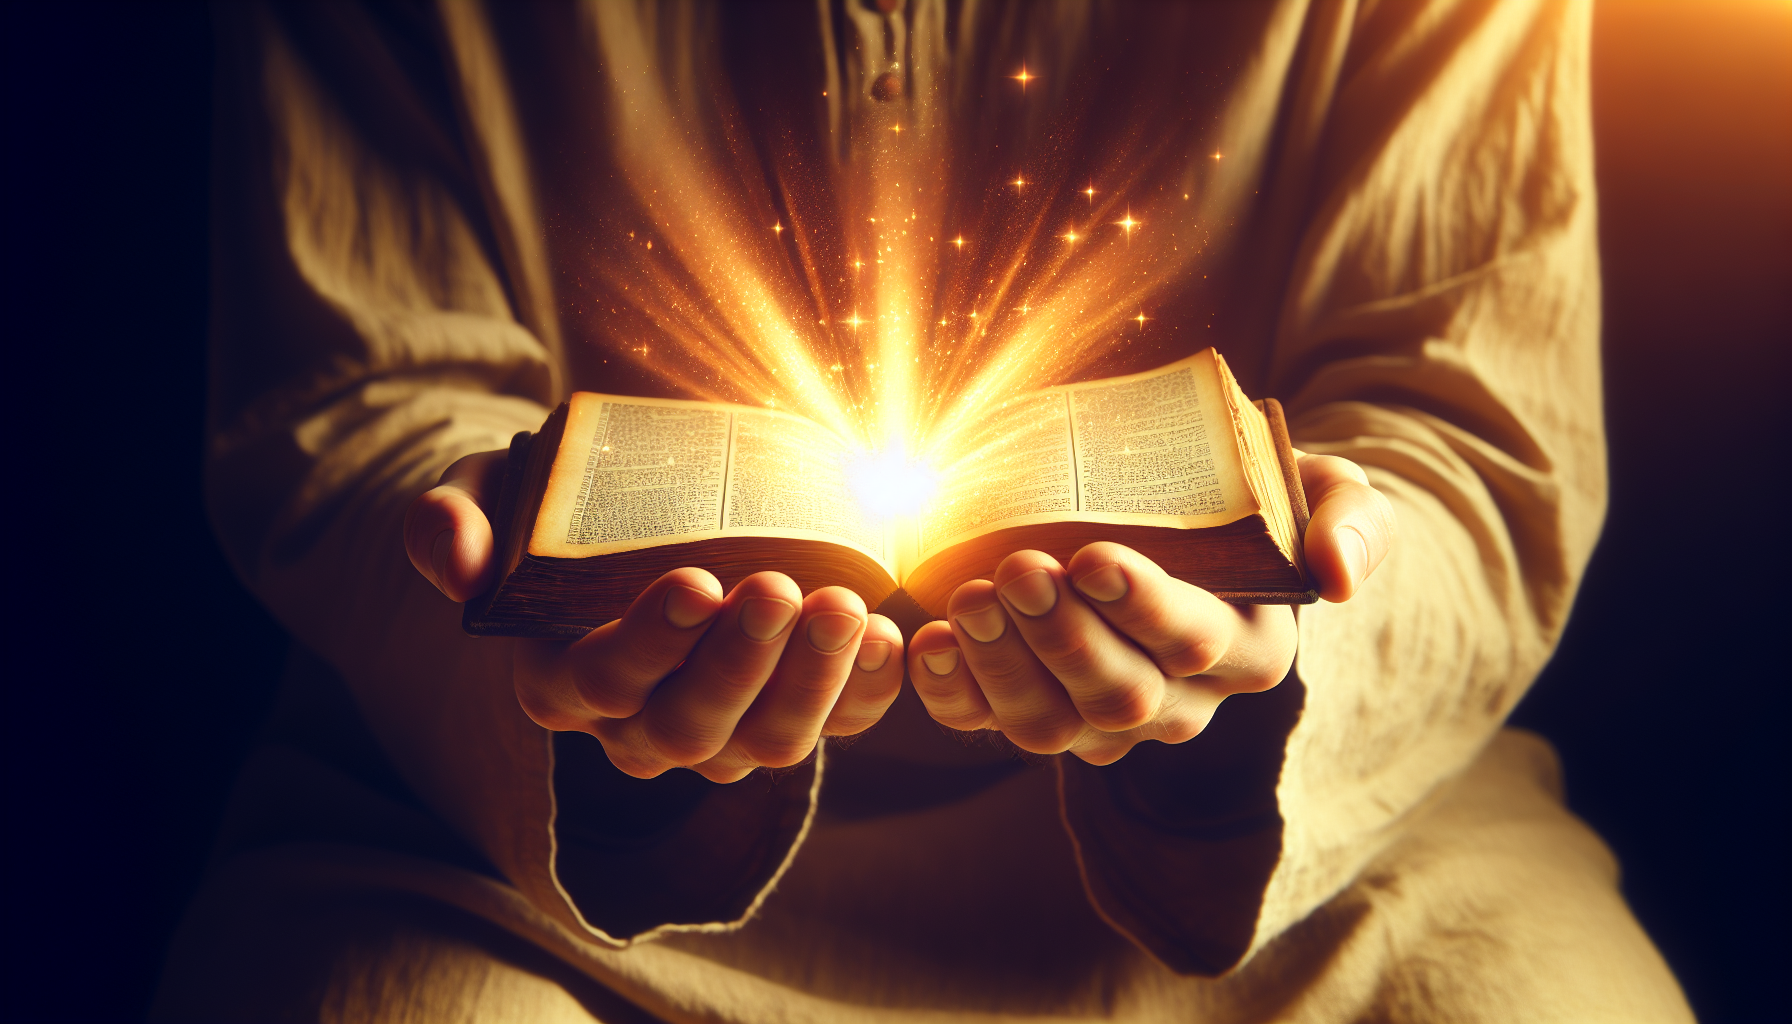 Hands holding a glowing bible with a divine light shining from its pages